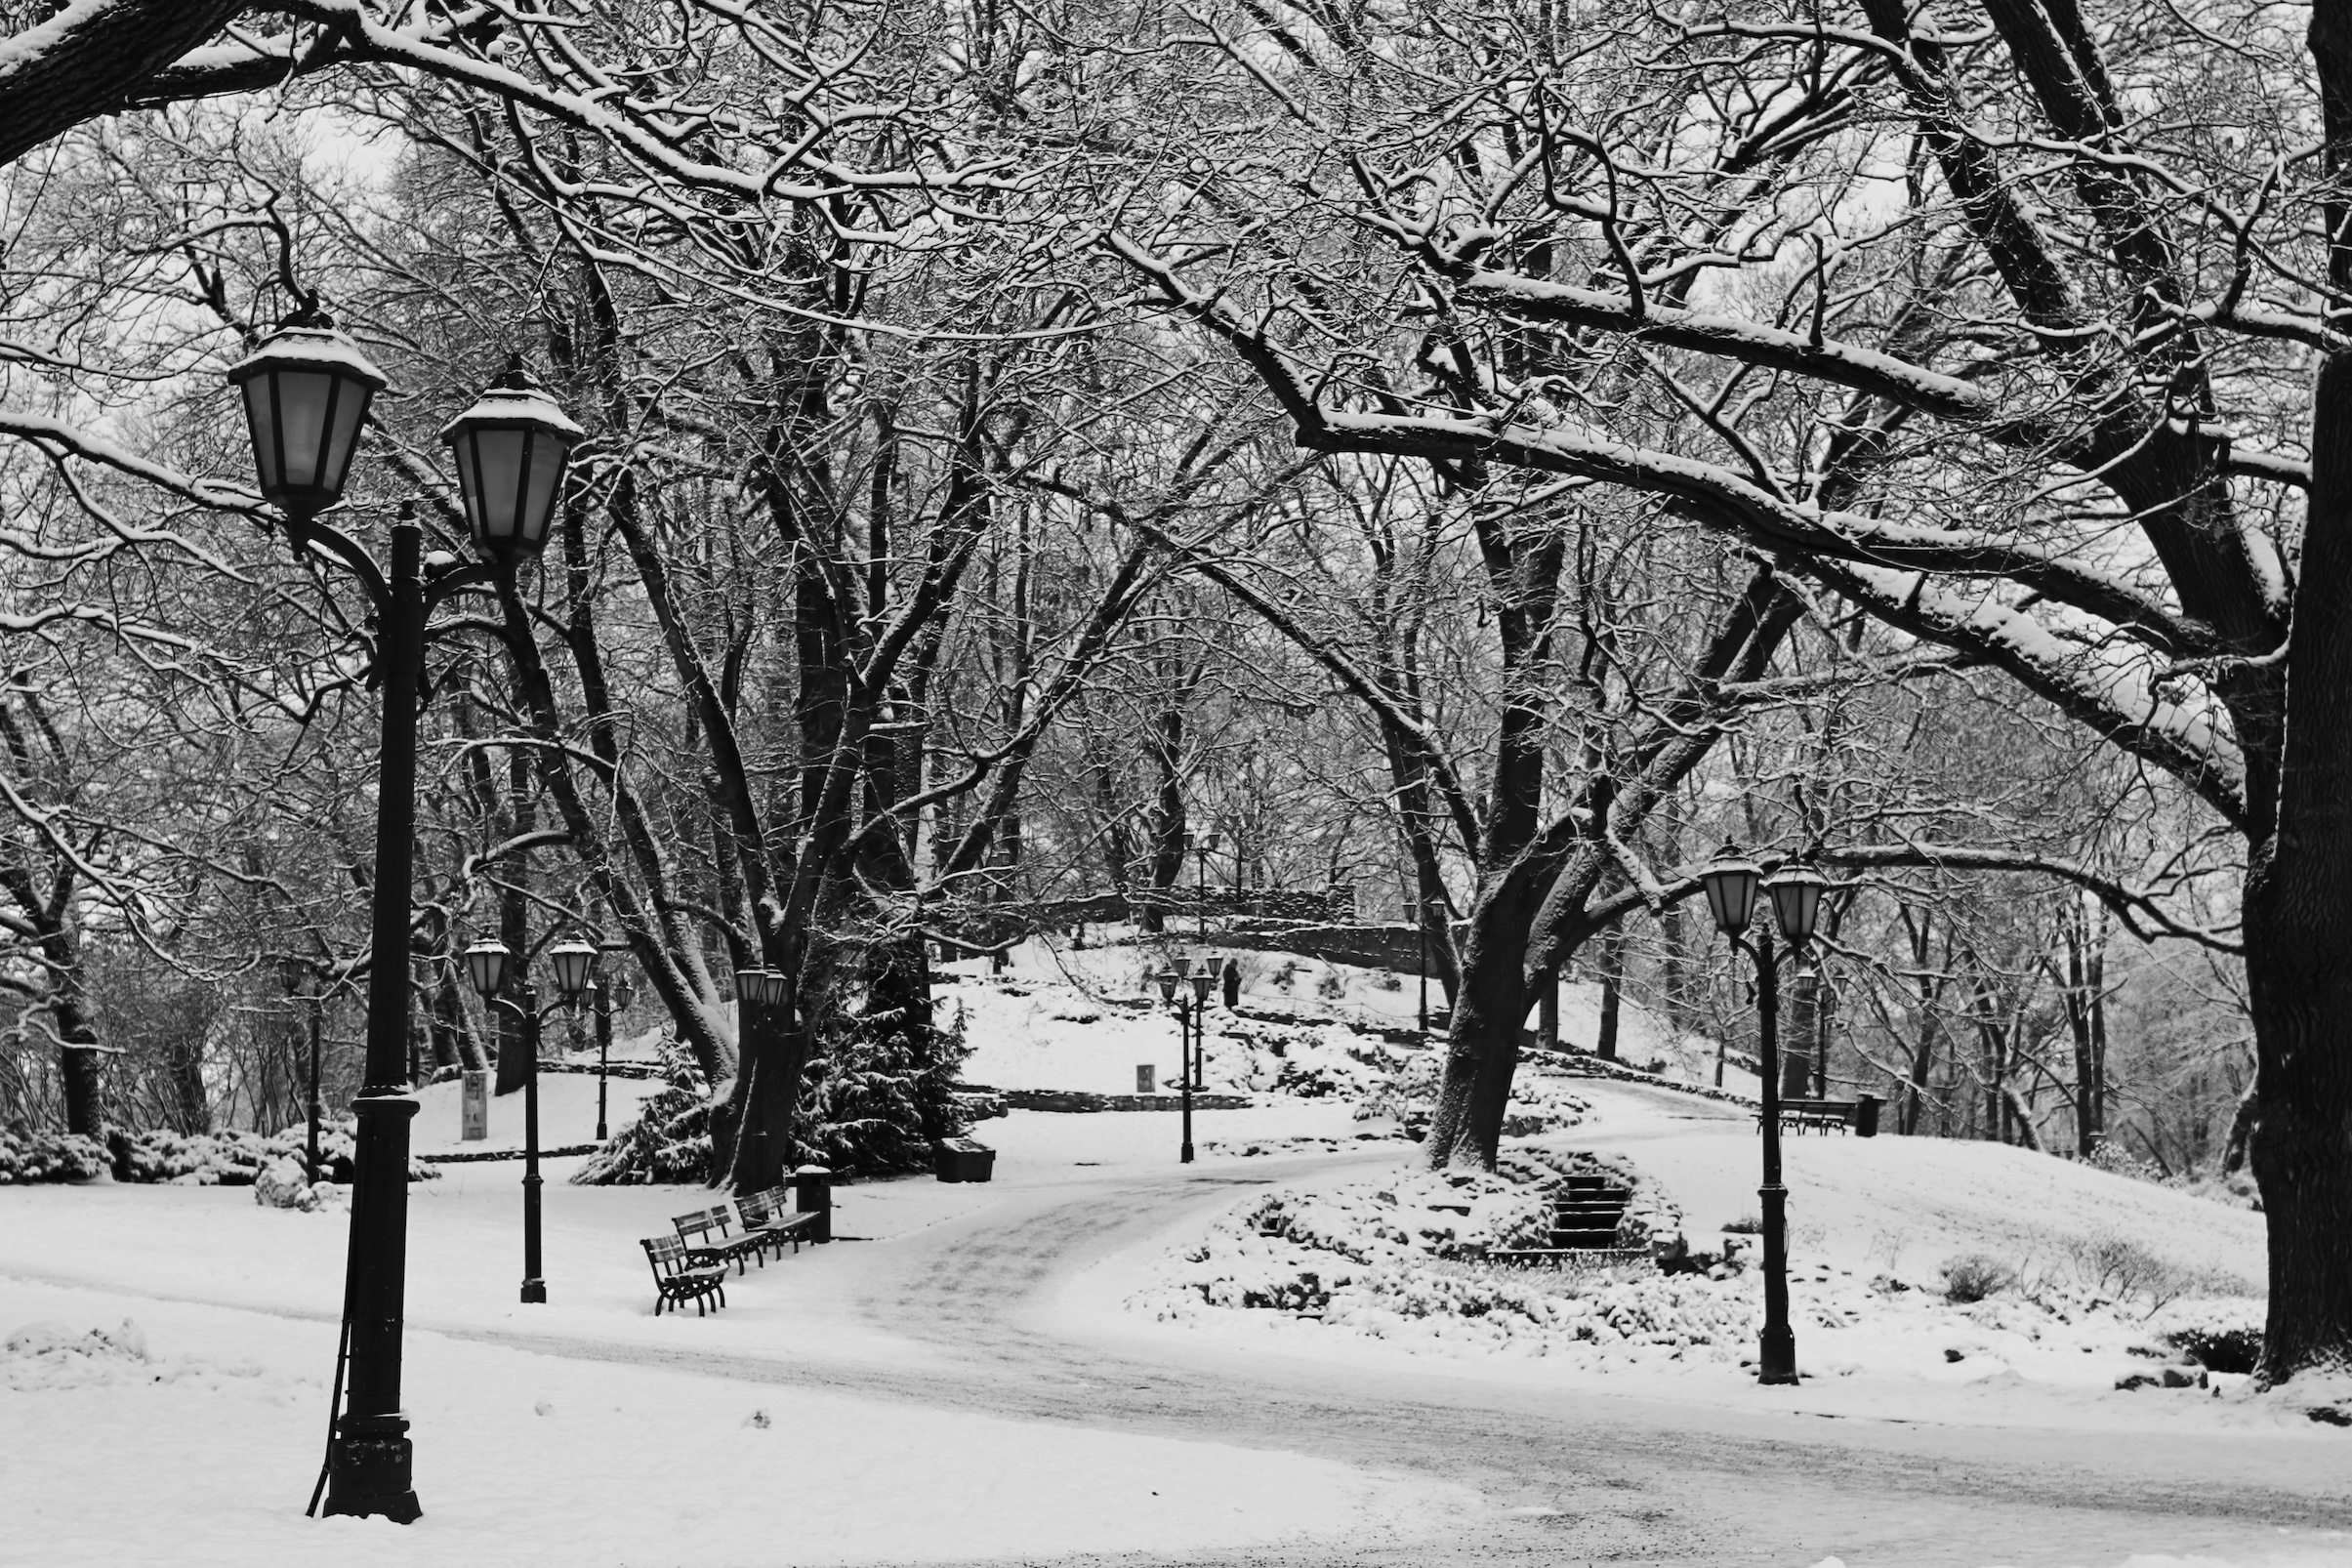 A winding trail leads up a small hill in a snow-covered park